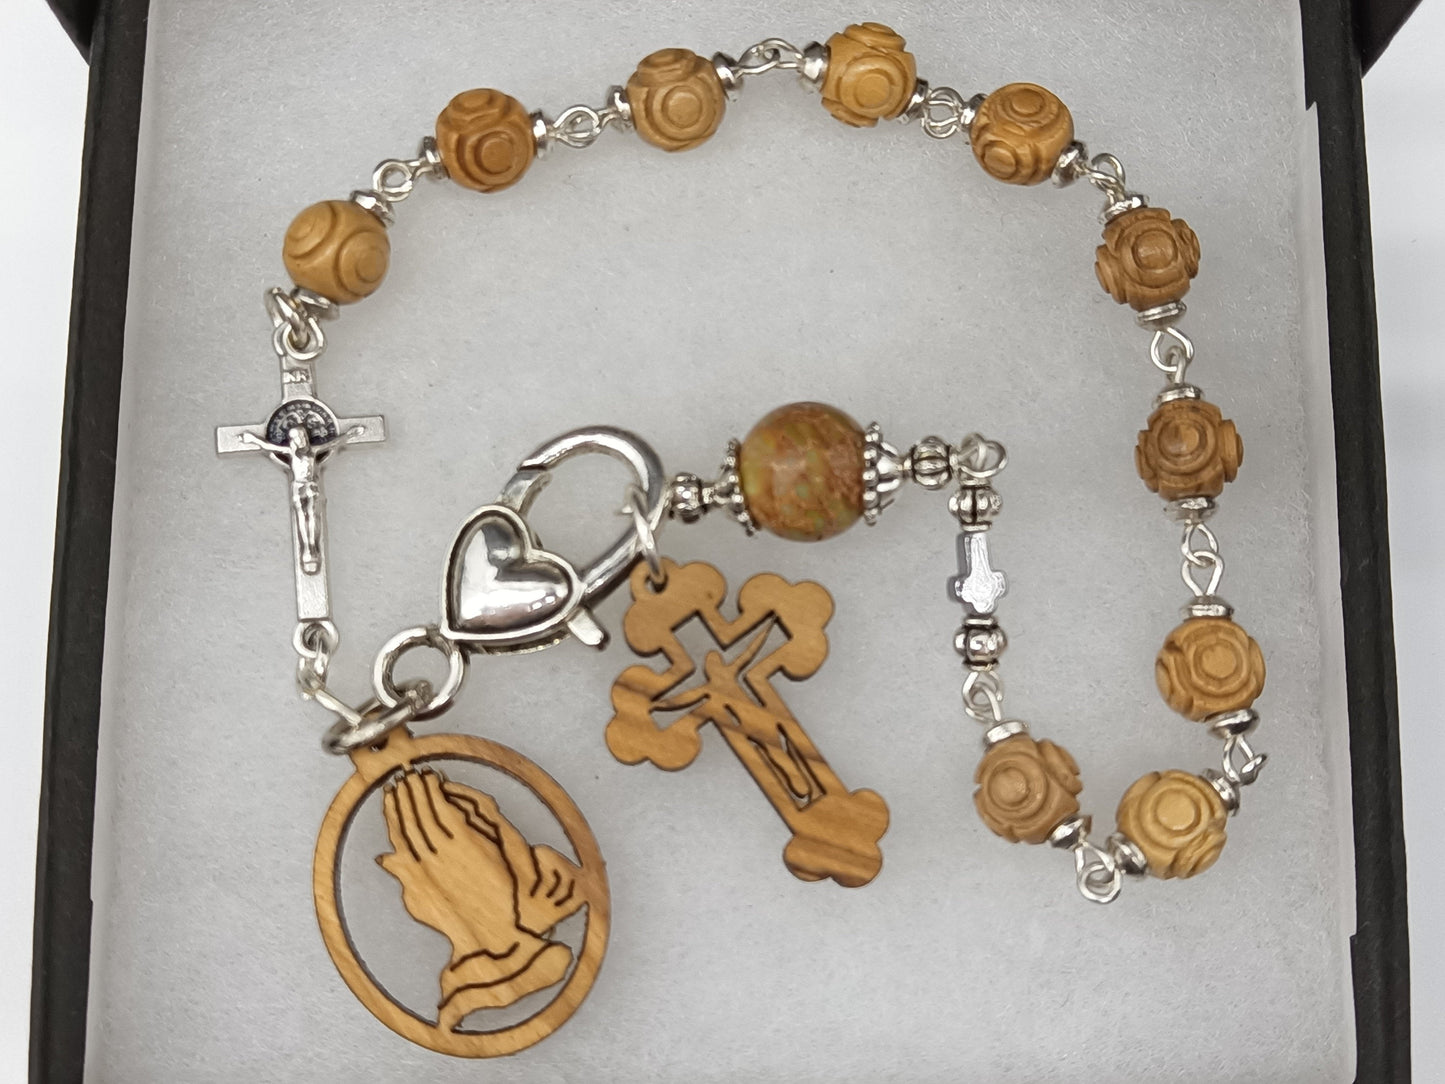 Praying Hands from the Holy Land wooden single decade rosary, Men's Rosary, gemstone rosary beads, pilgrims prayer beads, Communion gift.